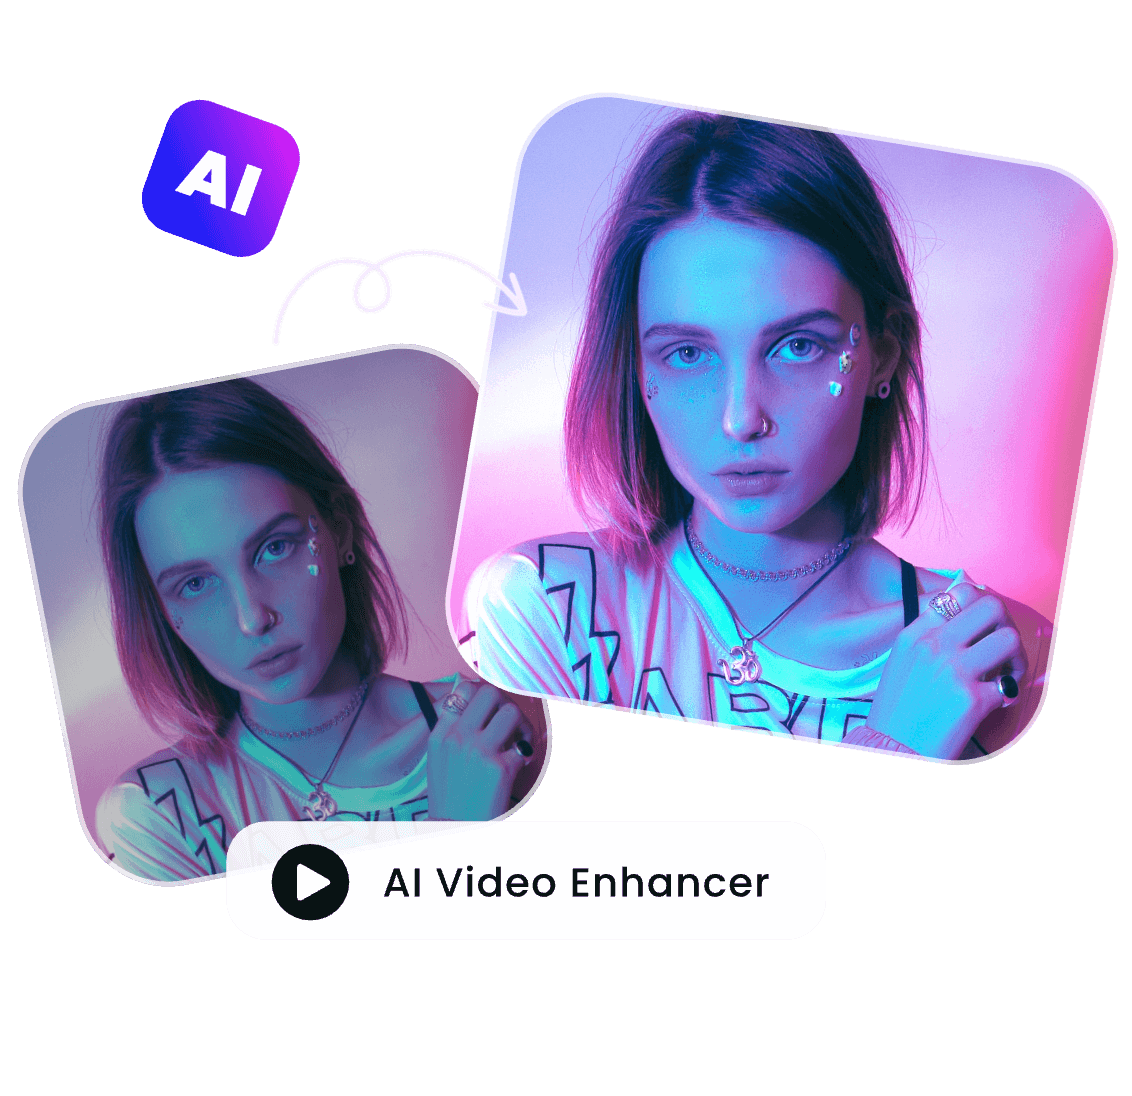 enhance a girl video's color with Clipfly's ai video enhancer tool